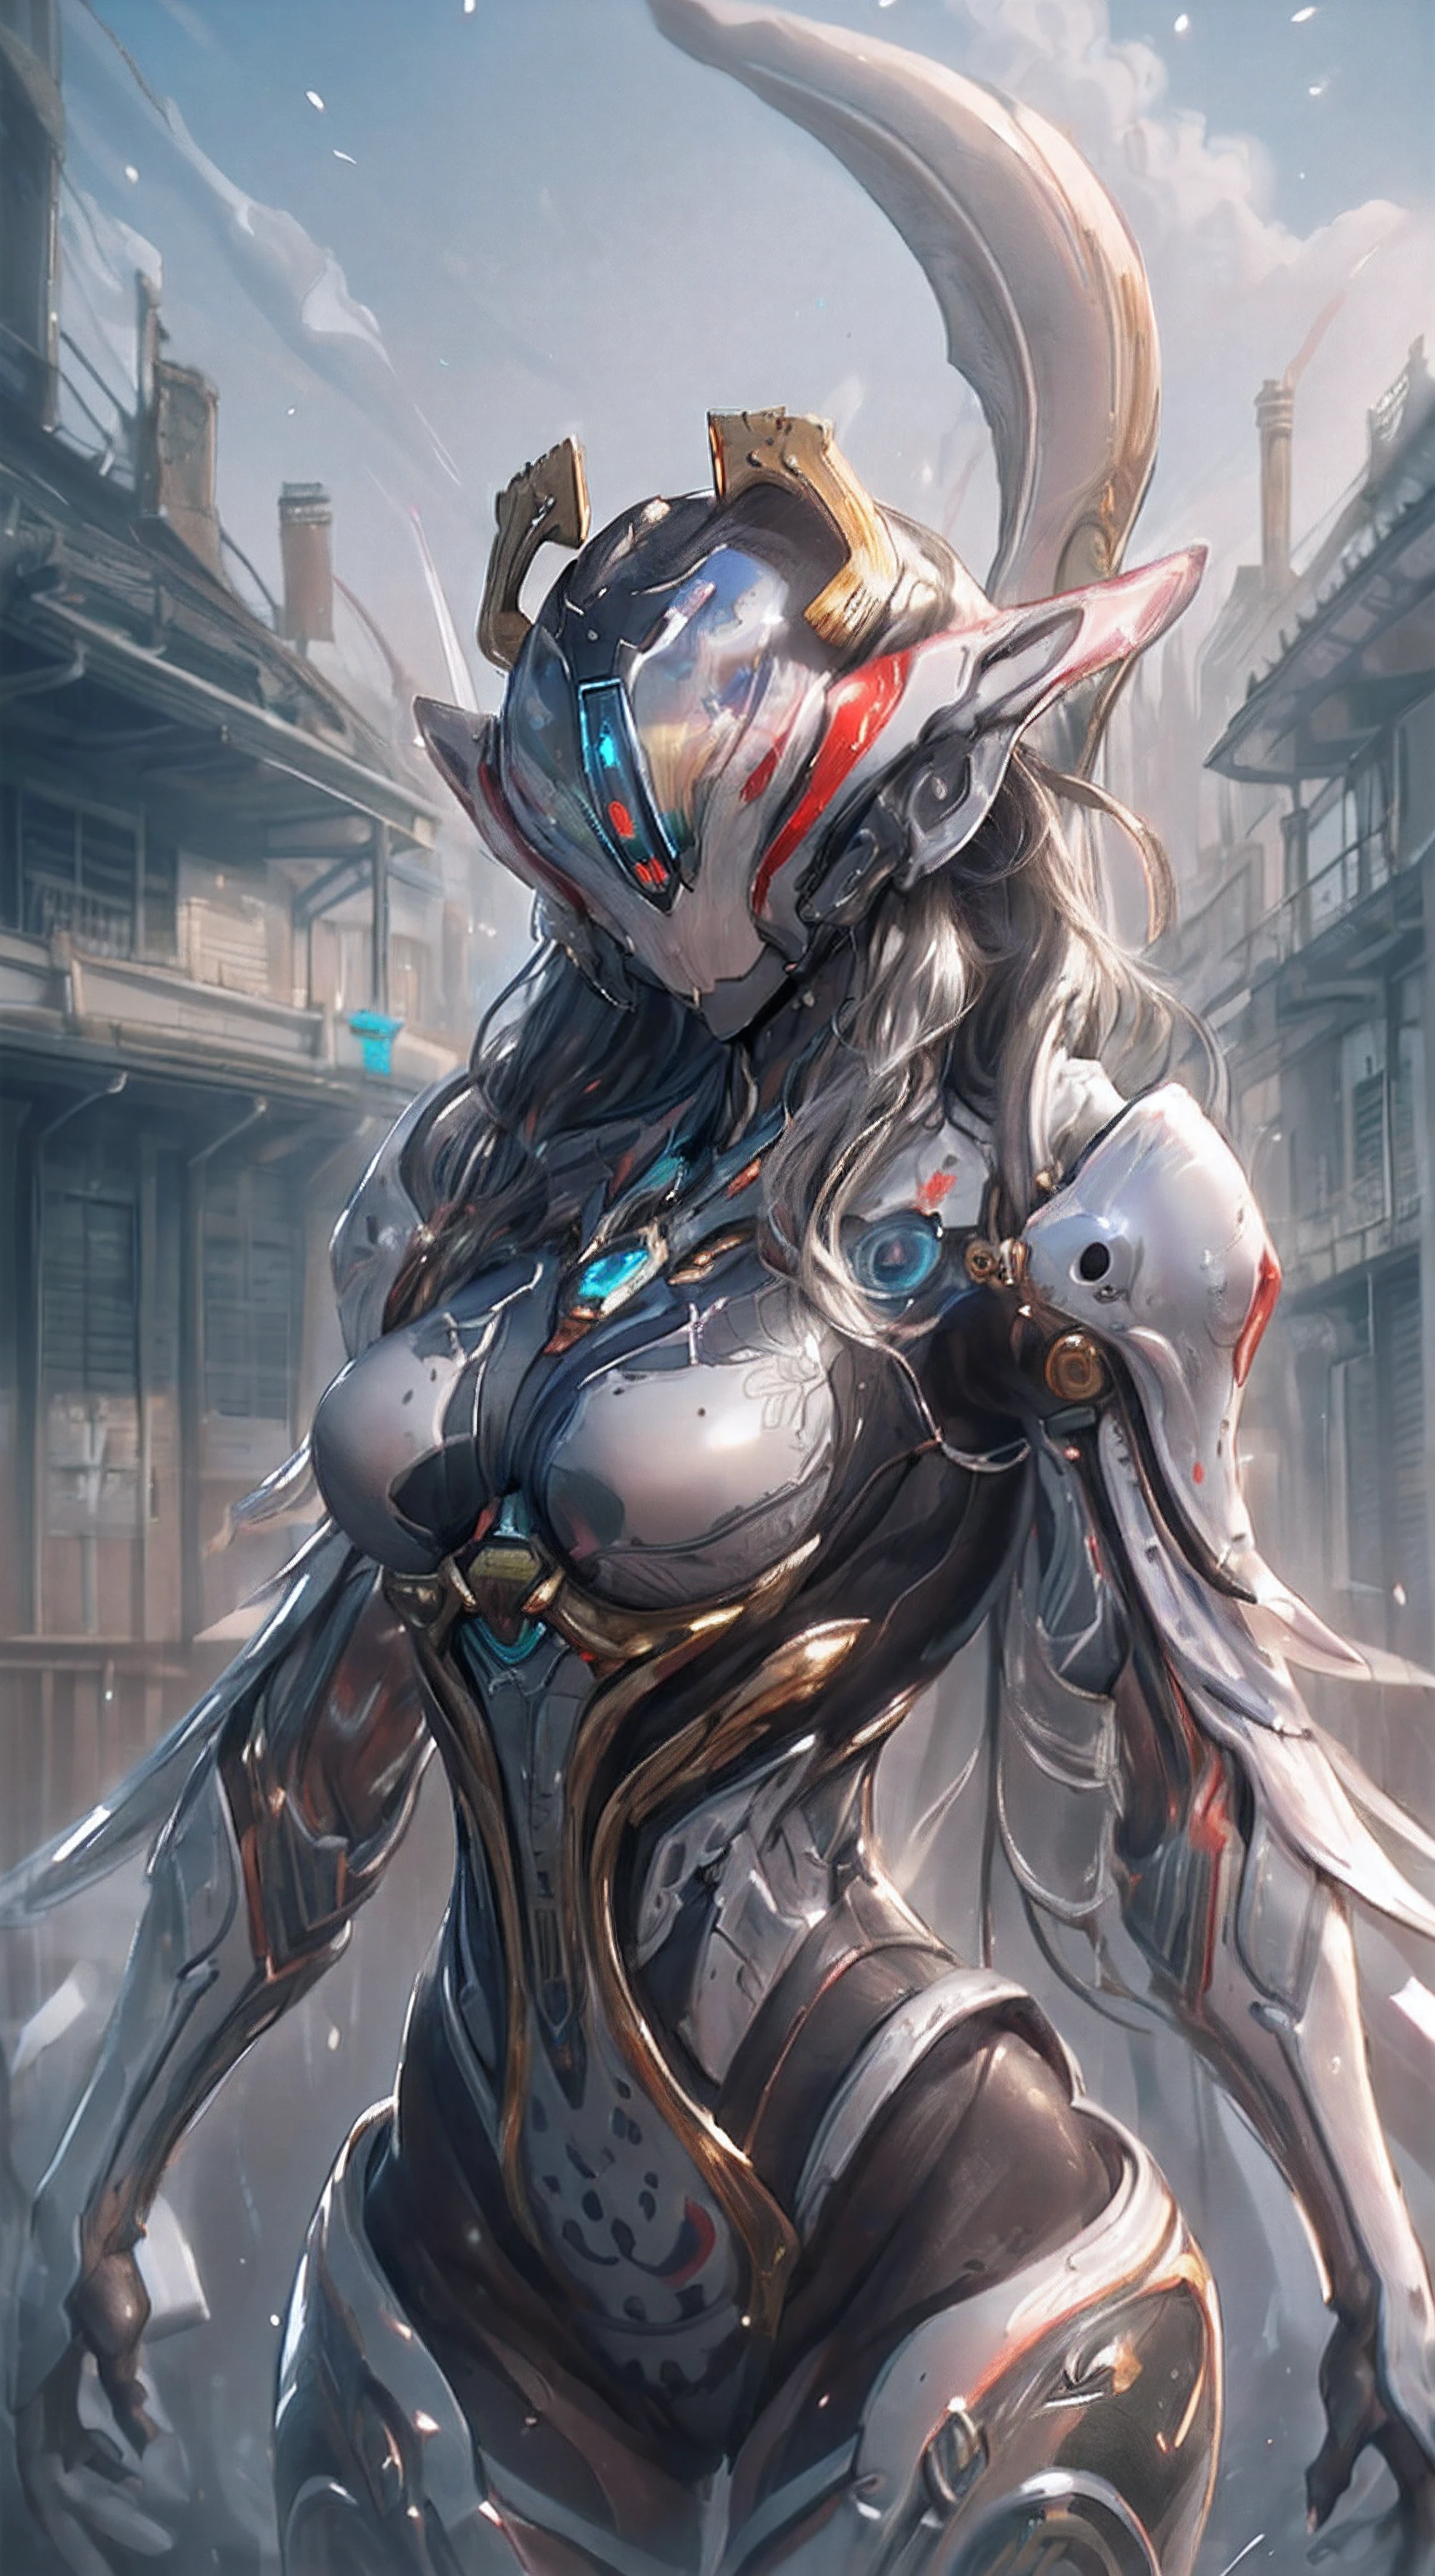 (((best quality))),(((ultra detailed))),(((masterpiece))),illustration,1 girl, no face, mysterious, helmet, Asuka cosplay costume, bodysuit,standing pose,Extreme detail expression,Ultra High Definition,Maximum Detail Display,Hyperdetail,Clear details,Amazing quality,Super details,Unbelievable,HDR,16K,details,The most authentic,Glossy solid color